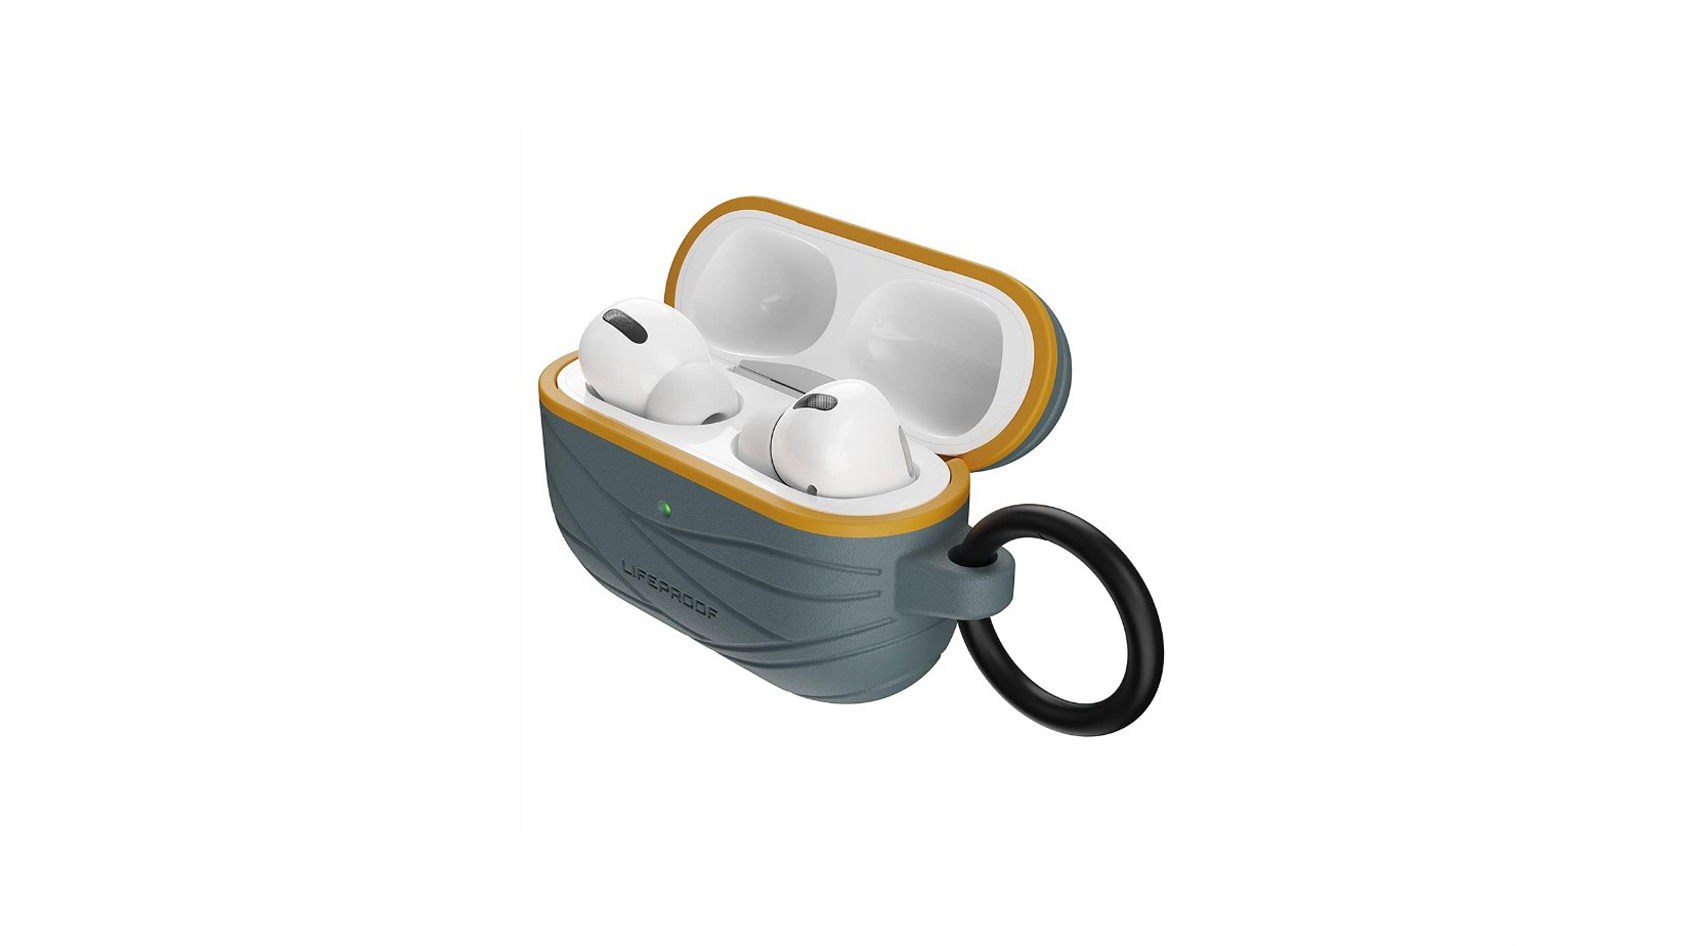 LifeProof Eco AirPods case shown with the buds included.